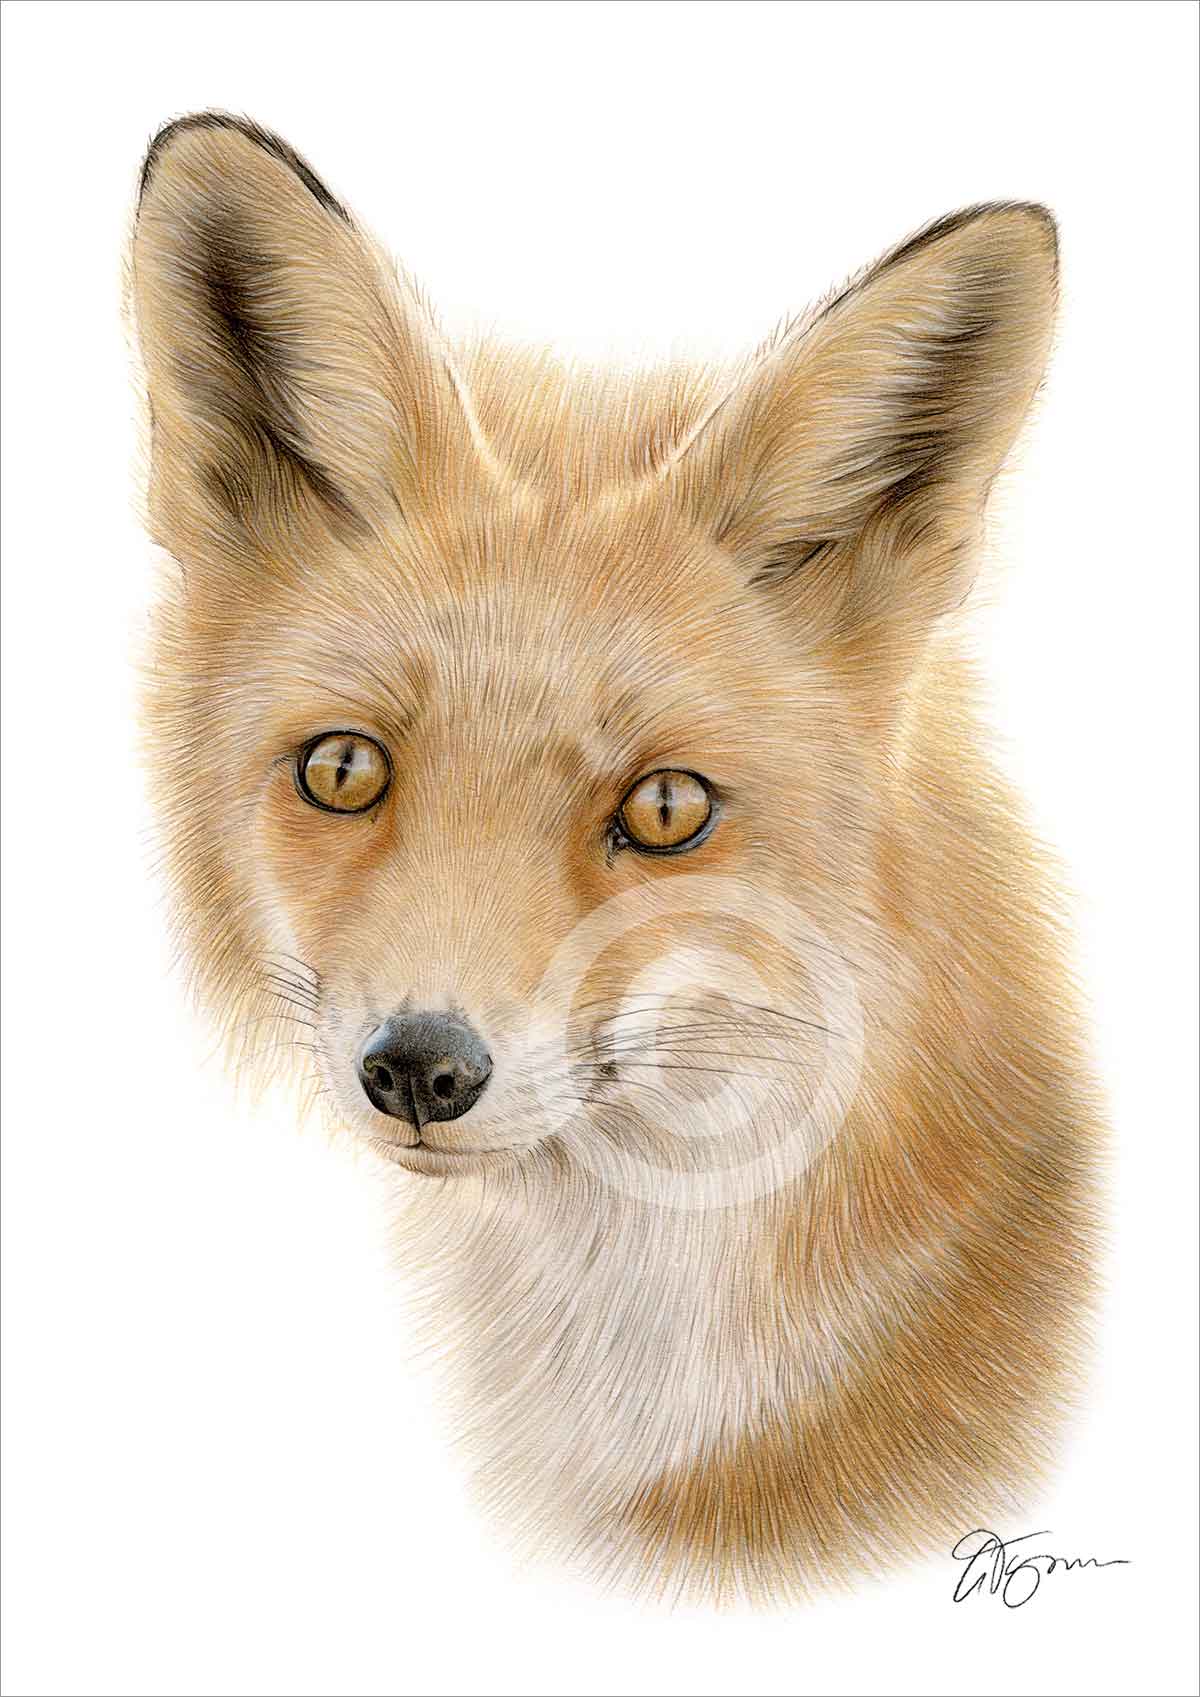 Colour pencil drawing of a young fox by artist Gary Tymon